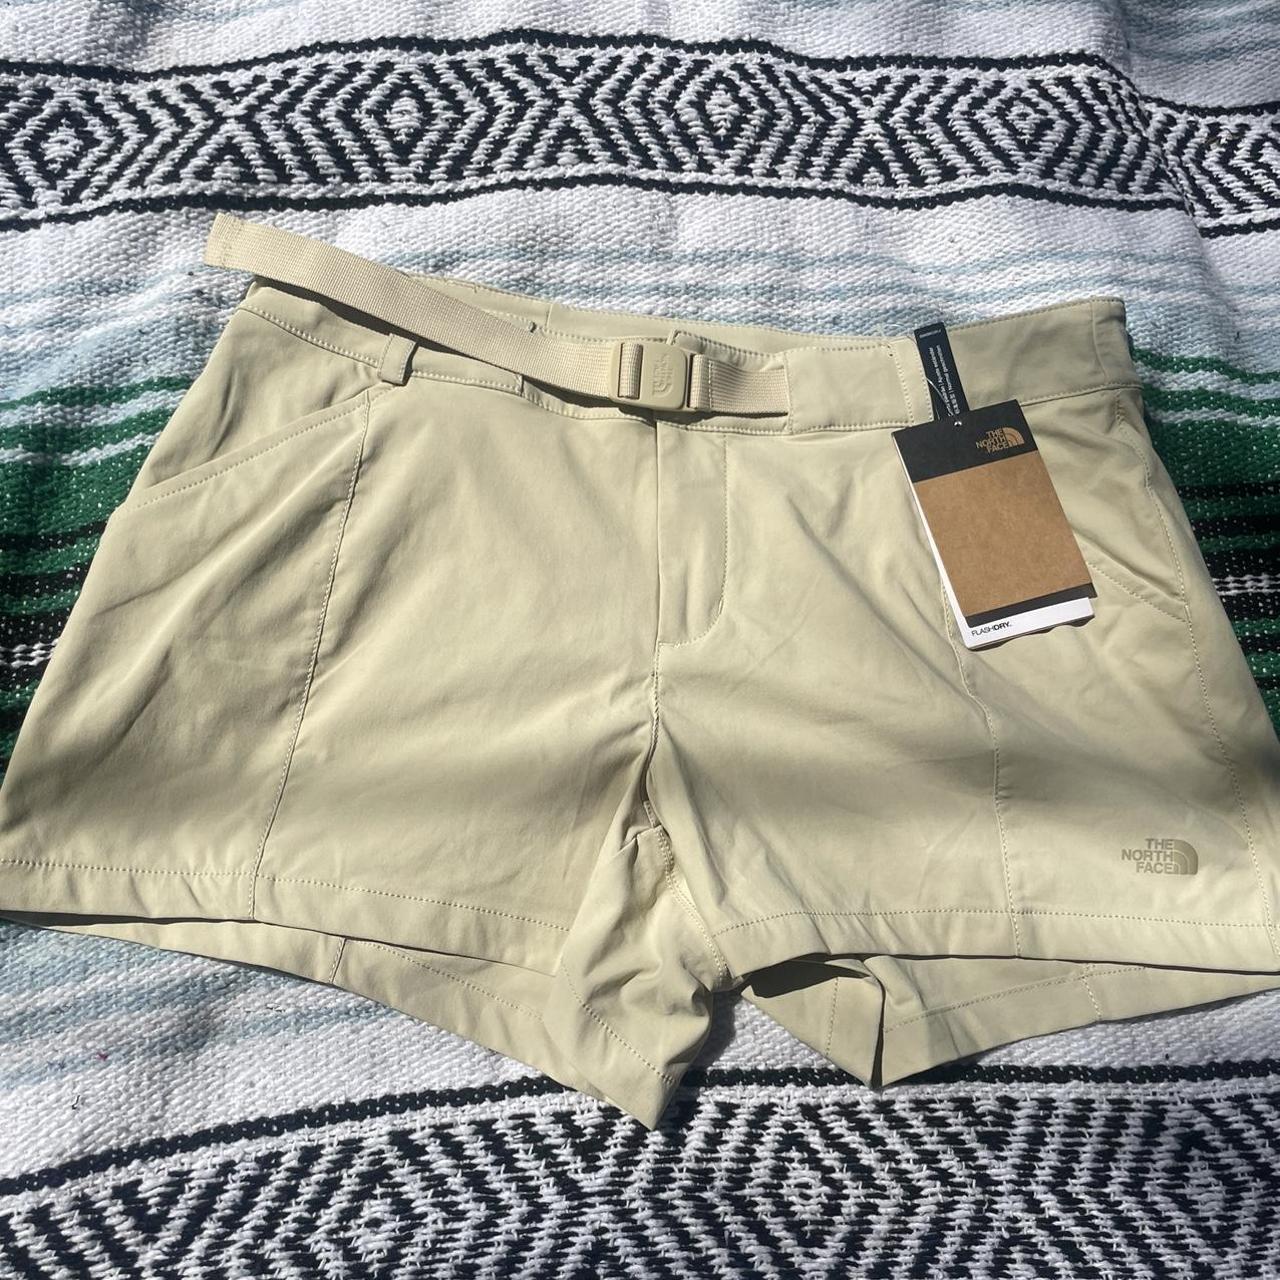 Brand new north face flash dry shorts #northface - Depop